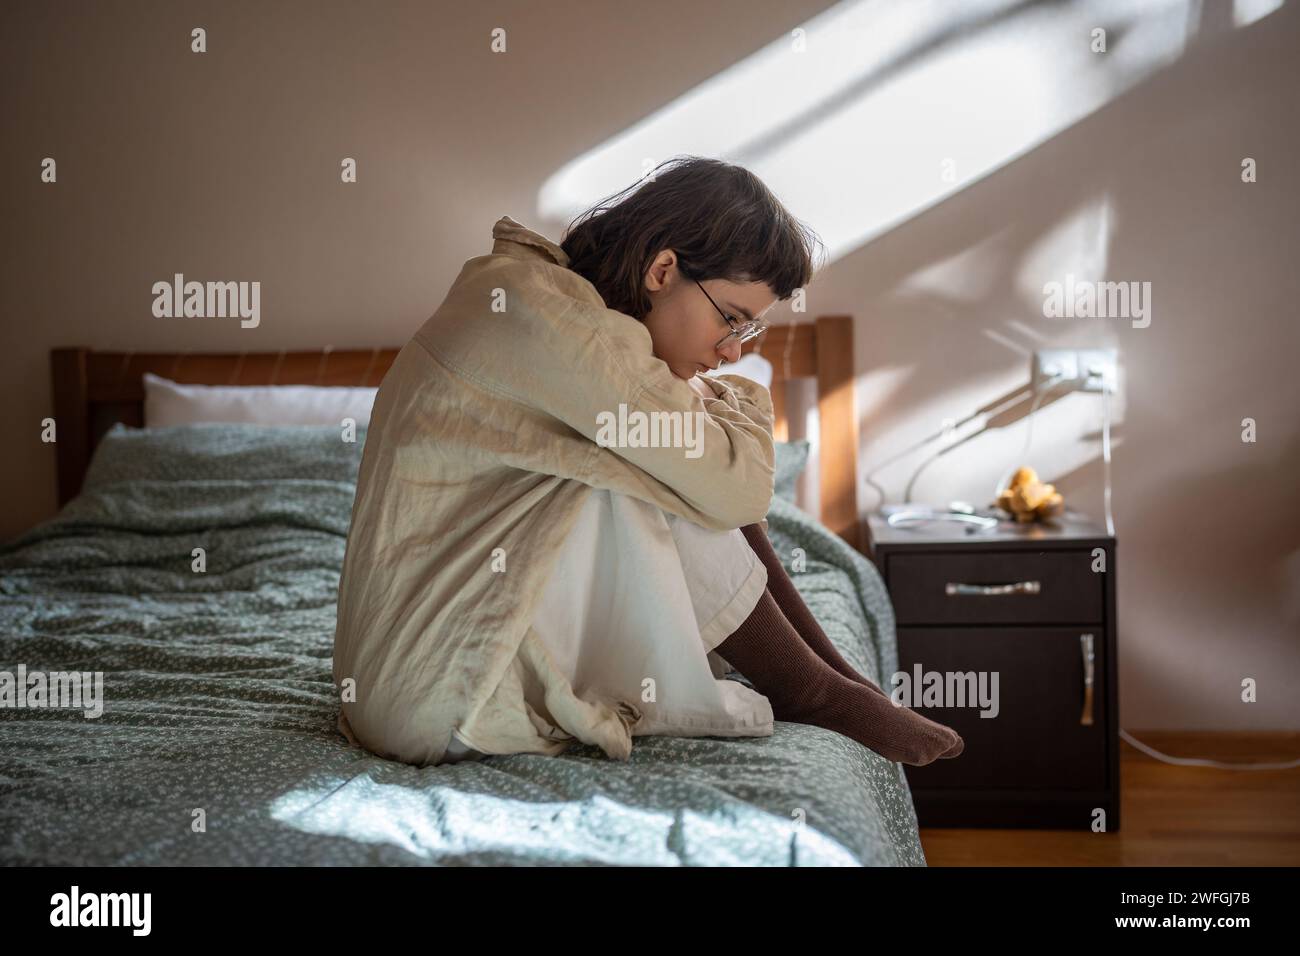 Apathetical teen girl sitting on bed embracing knees feeling procrastination, depression, loneliness Stock Photo